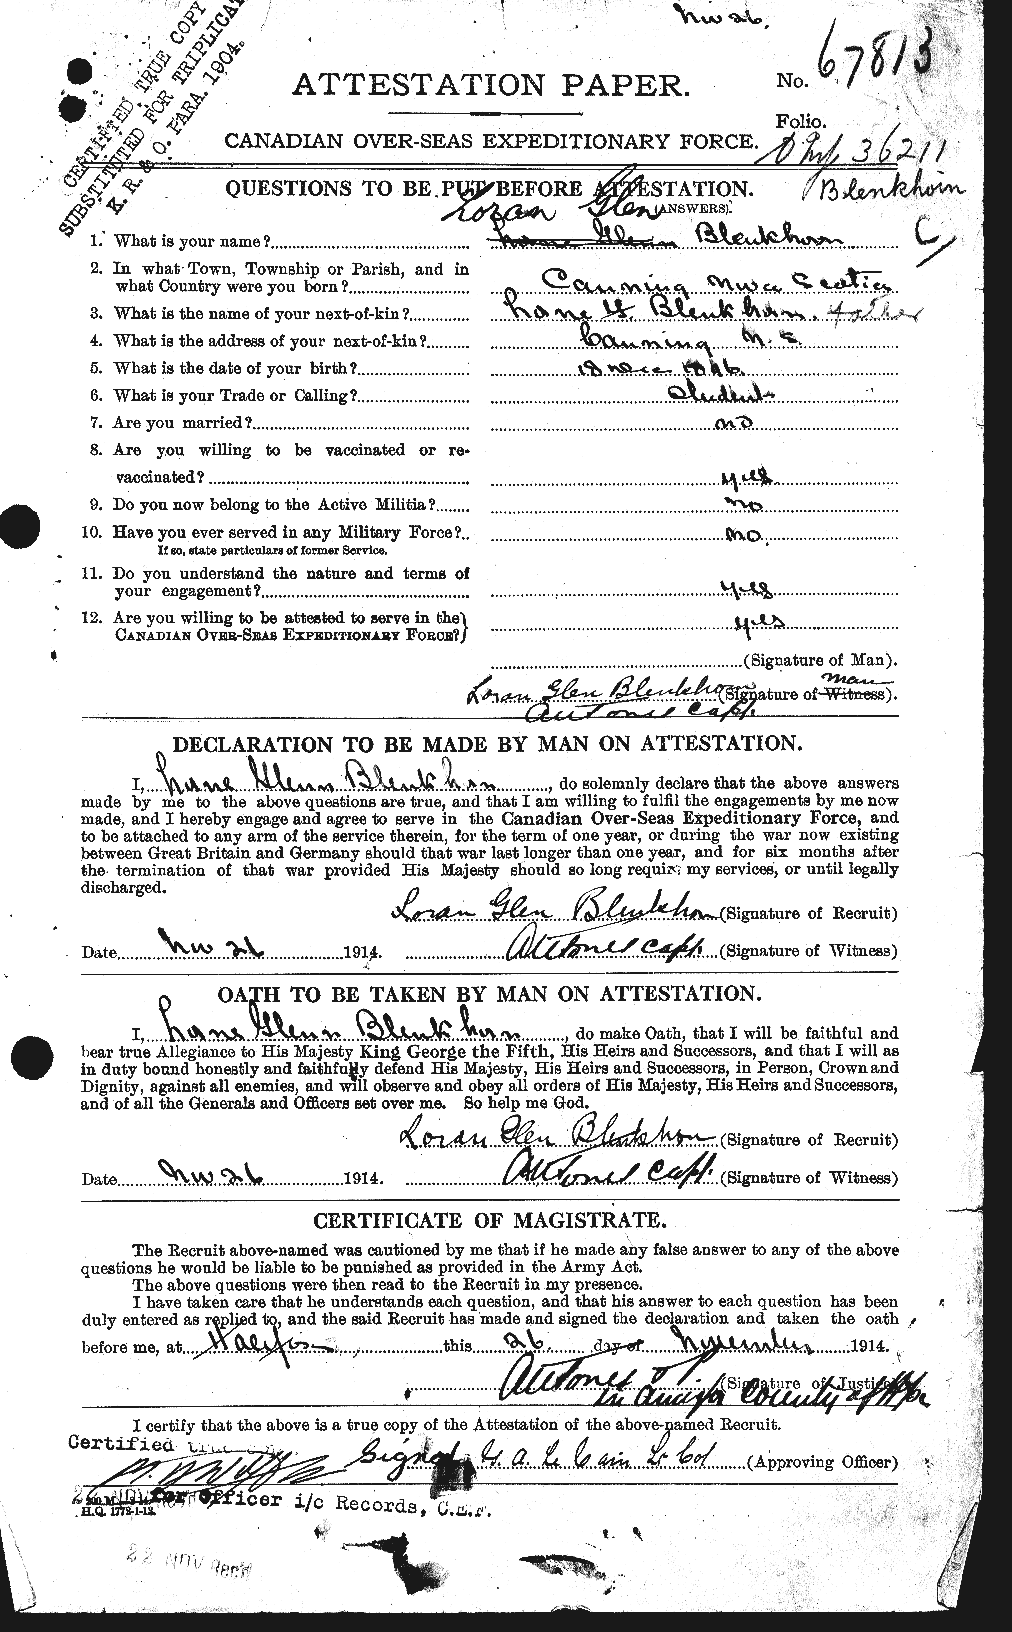 Personnel Records of the First World War - CEF 247975a